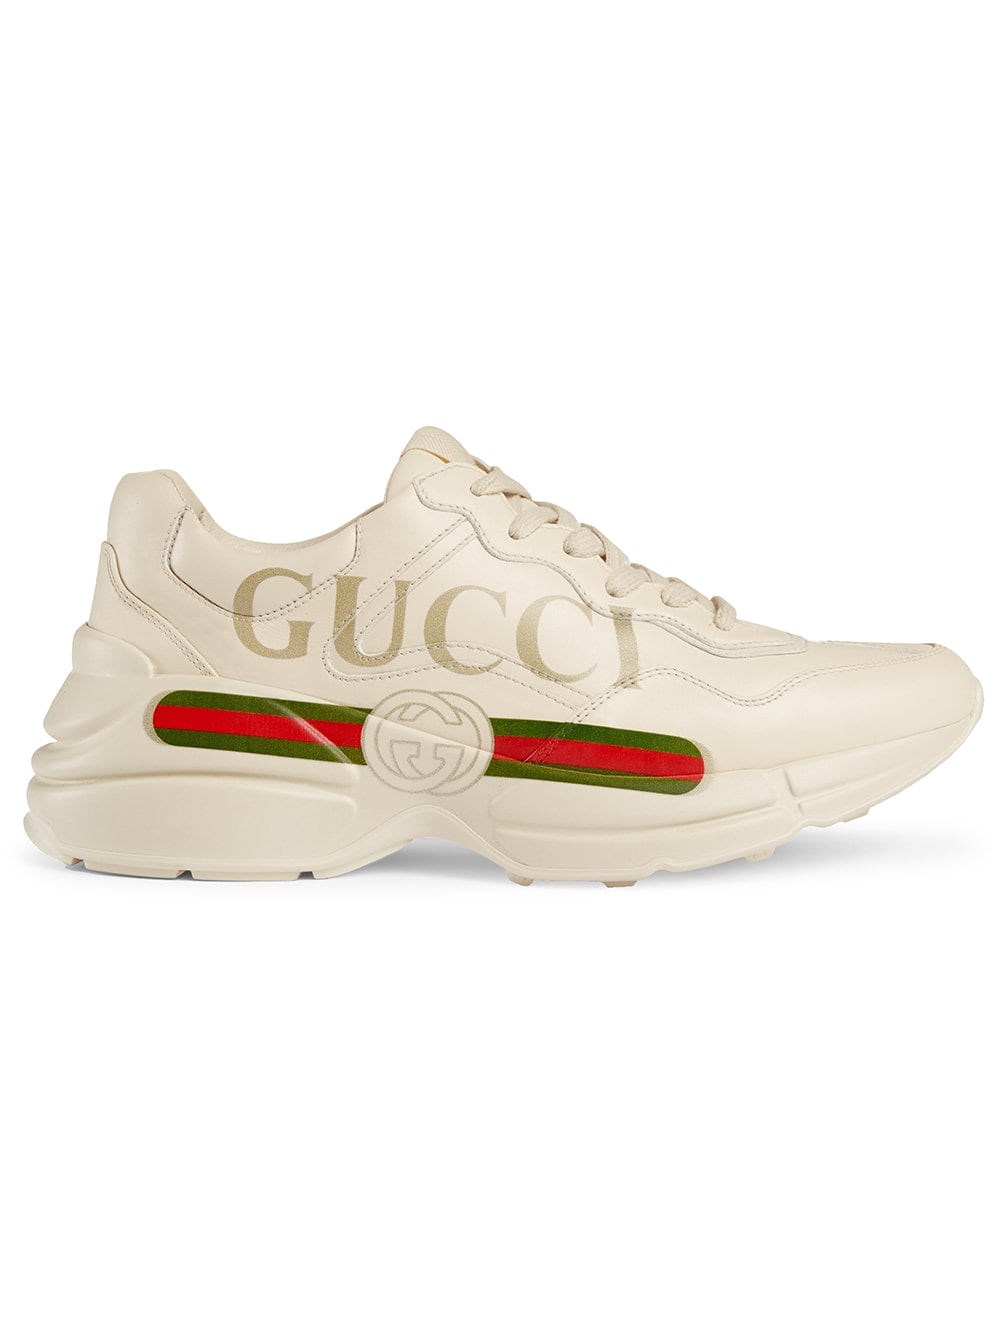 gucci SNEAKERS LOGO available on 